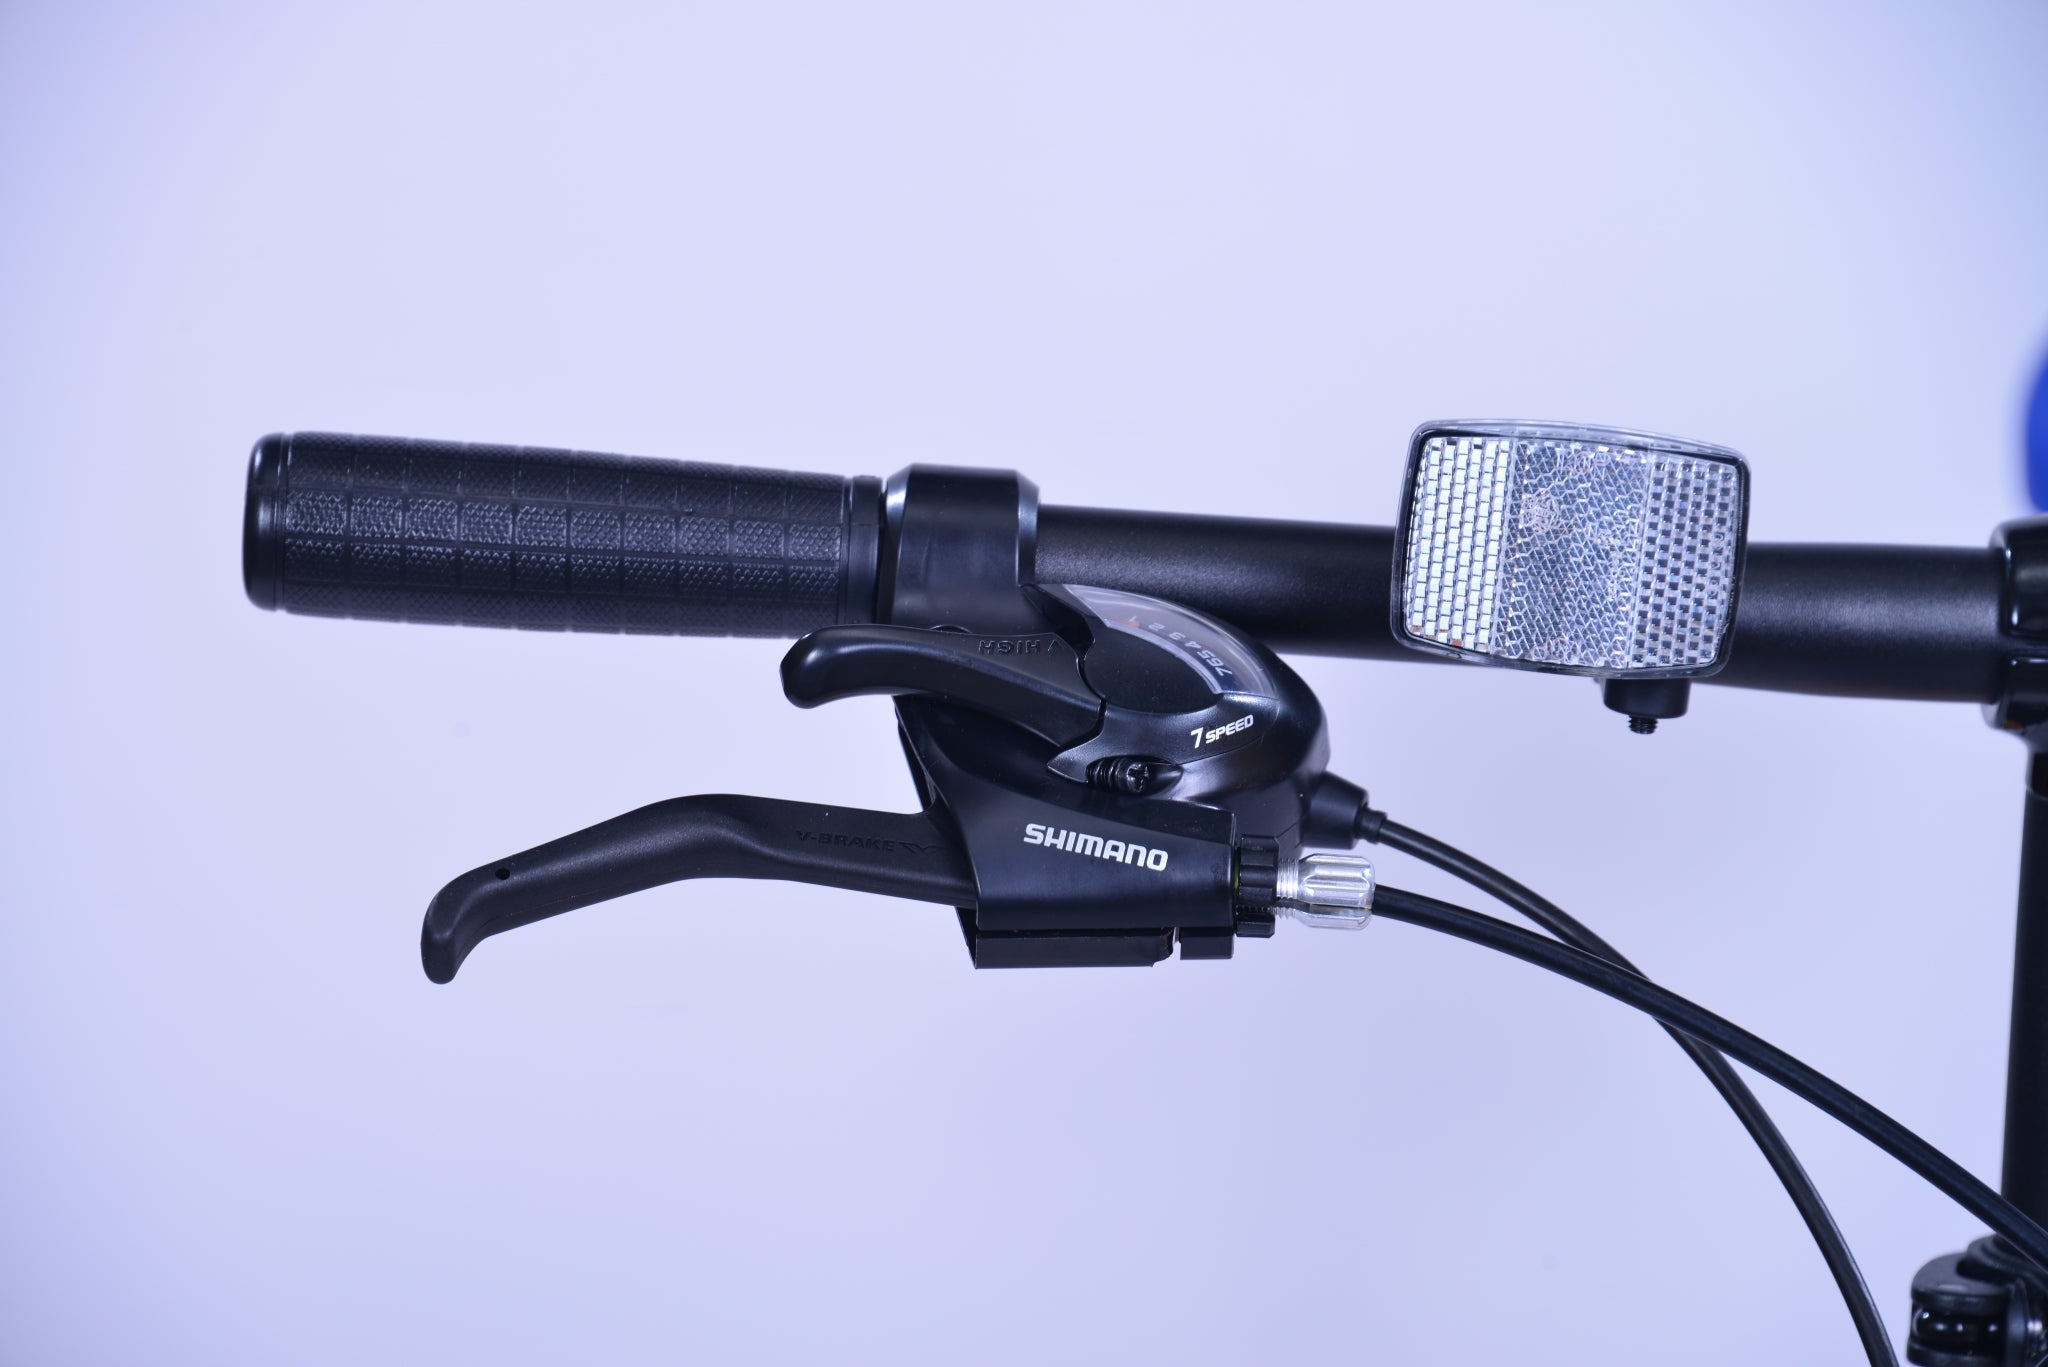 Right handlebar with Shimano gear shift for a bike.